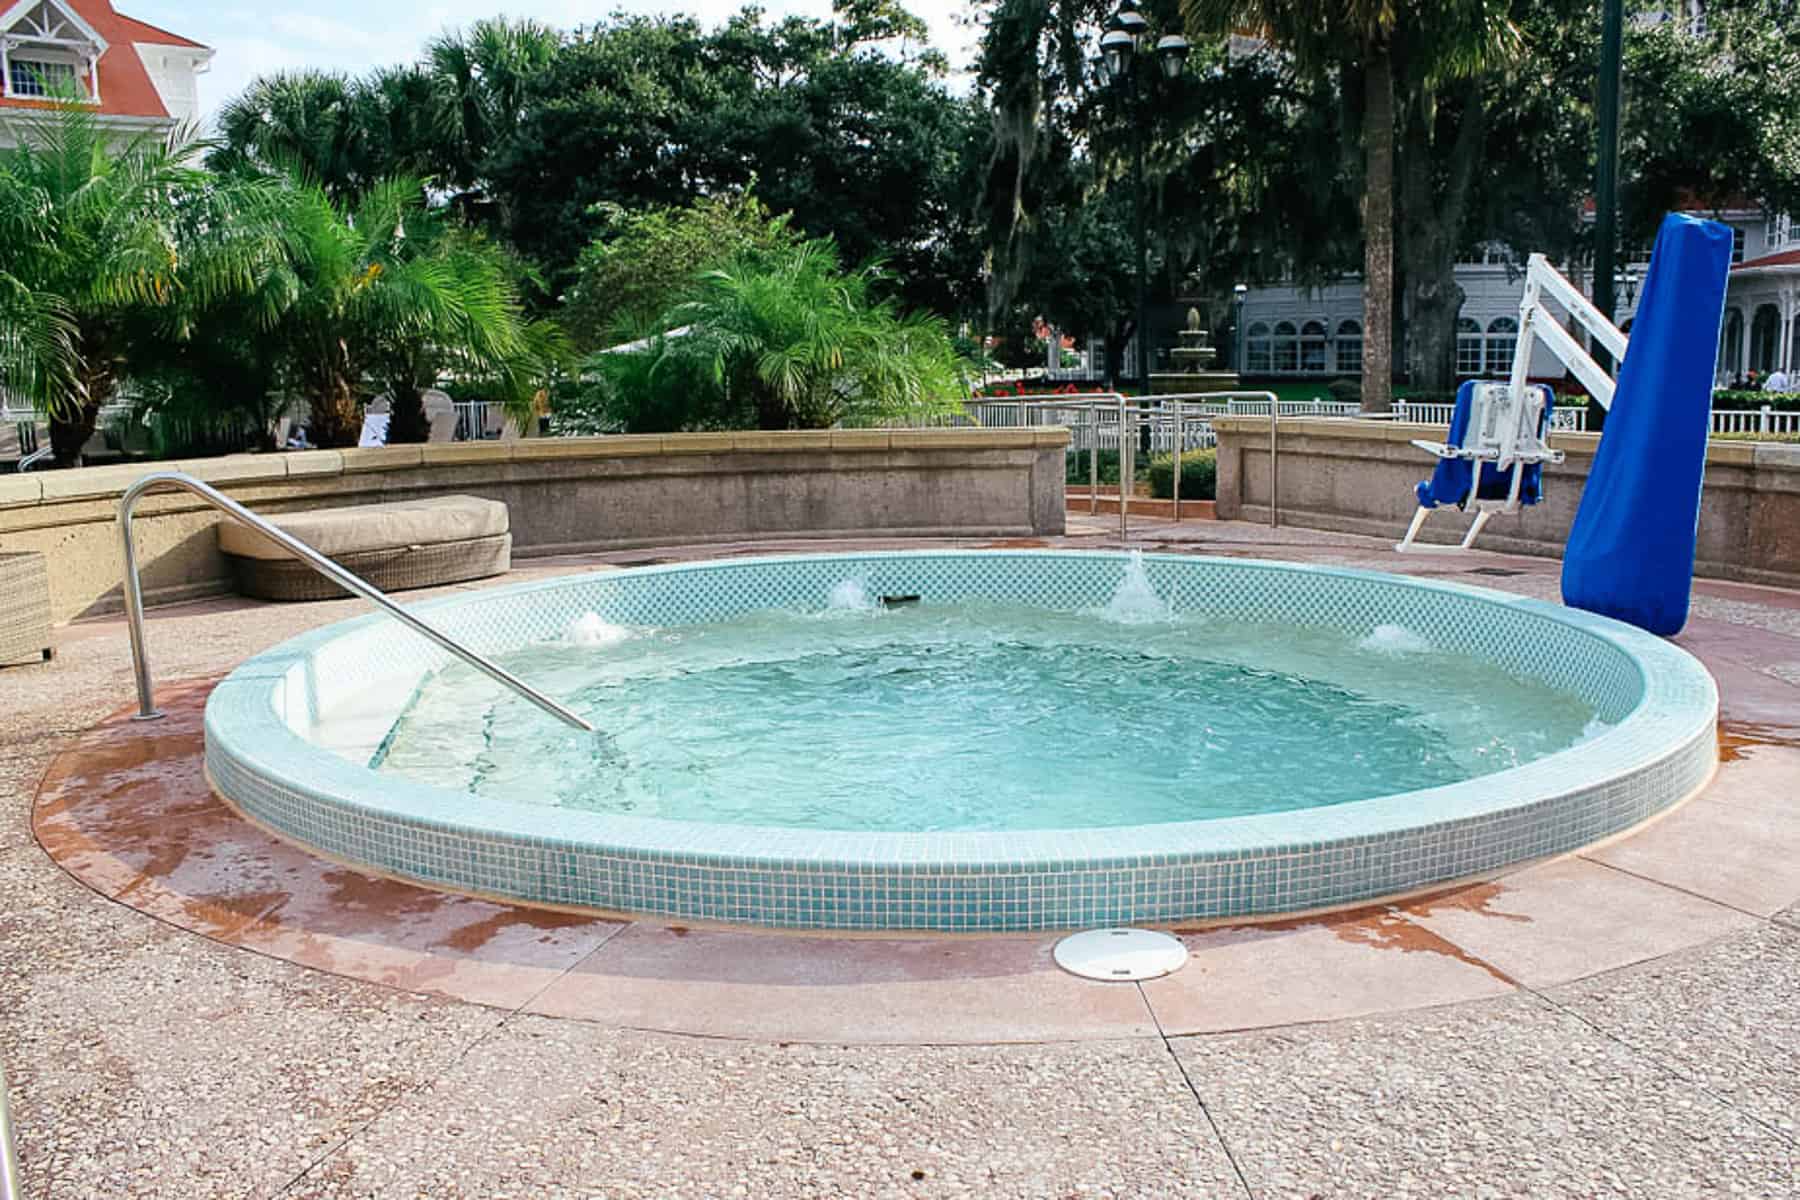 whirlpool spa at Disney's Grand Floridian's Courtyard Pool 